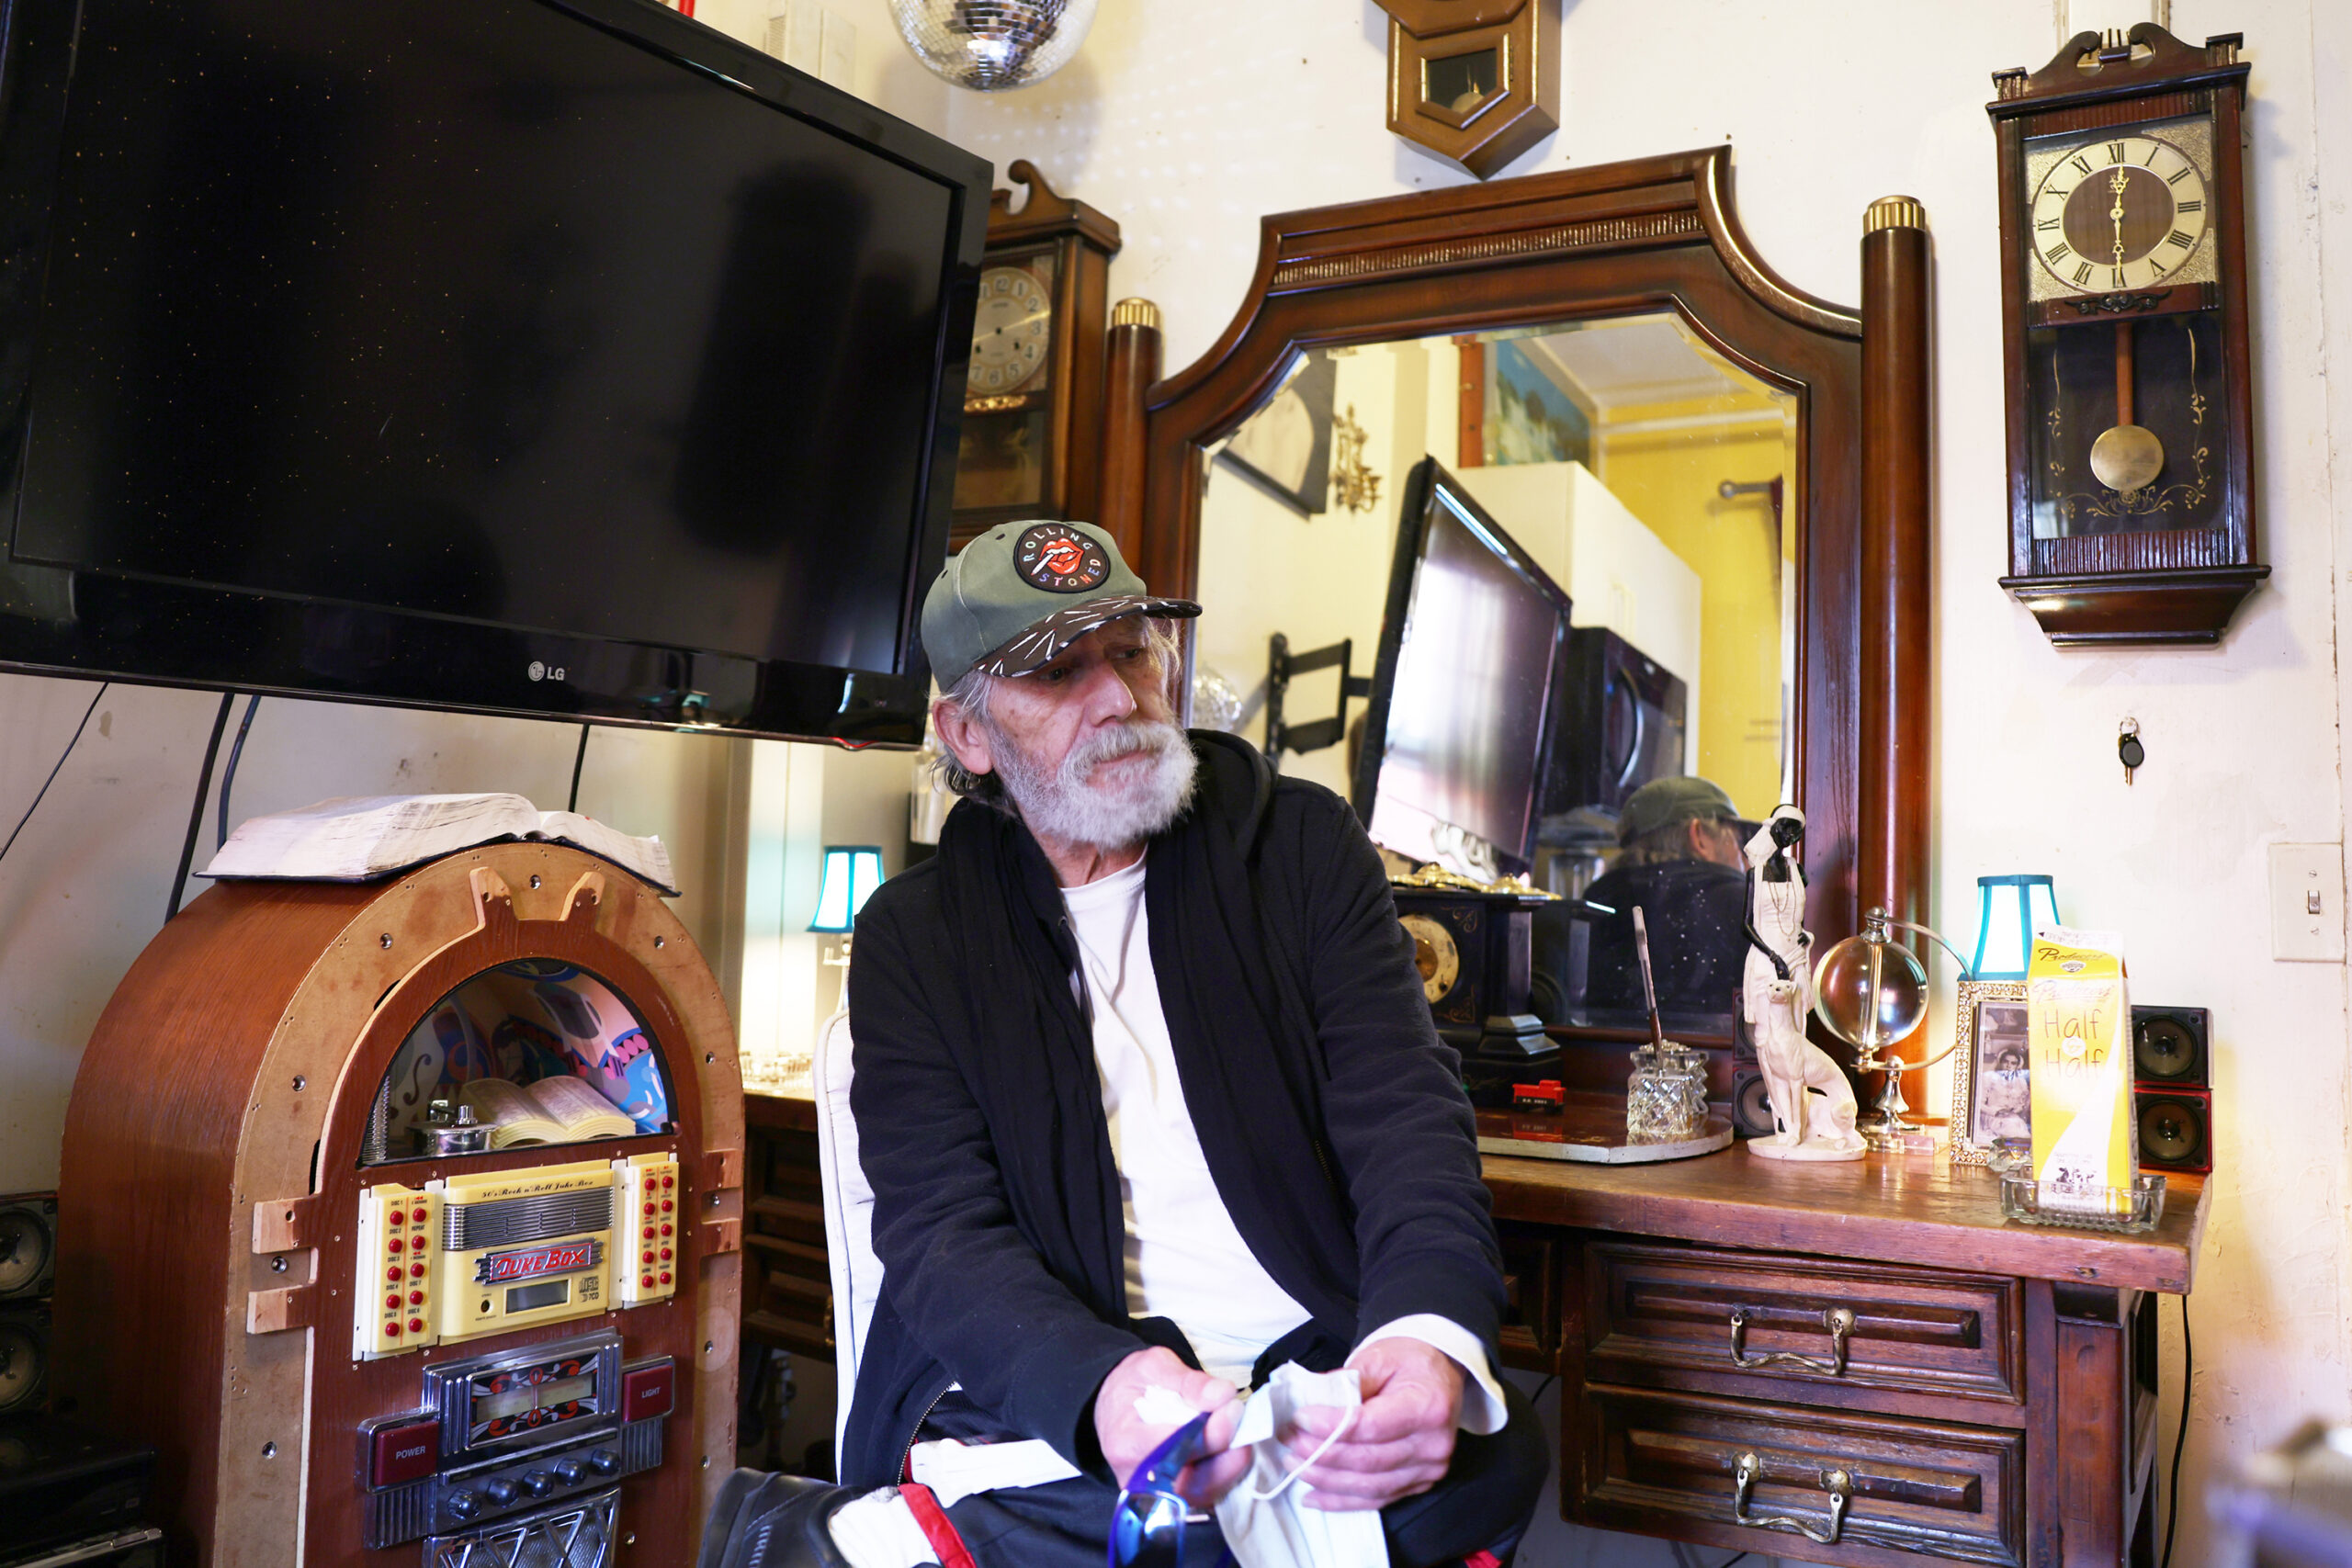 An elderly man with a beard sits by vintage items, including a jukebox, old clocks, and a mirror reflecting the room.